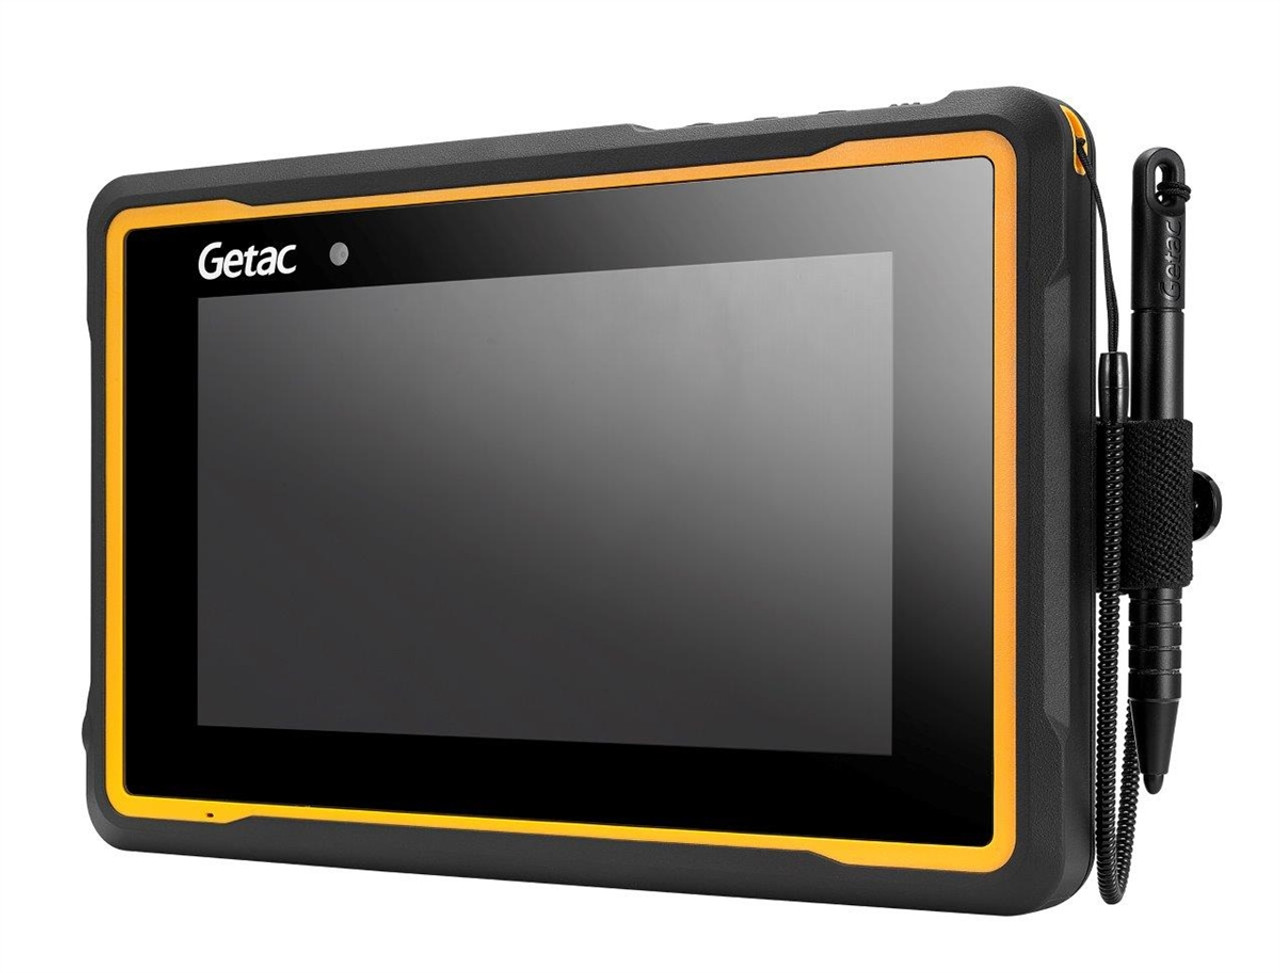 CORE-T5 - The rugged tablet without compromise